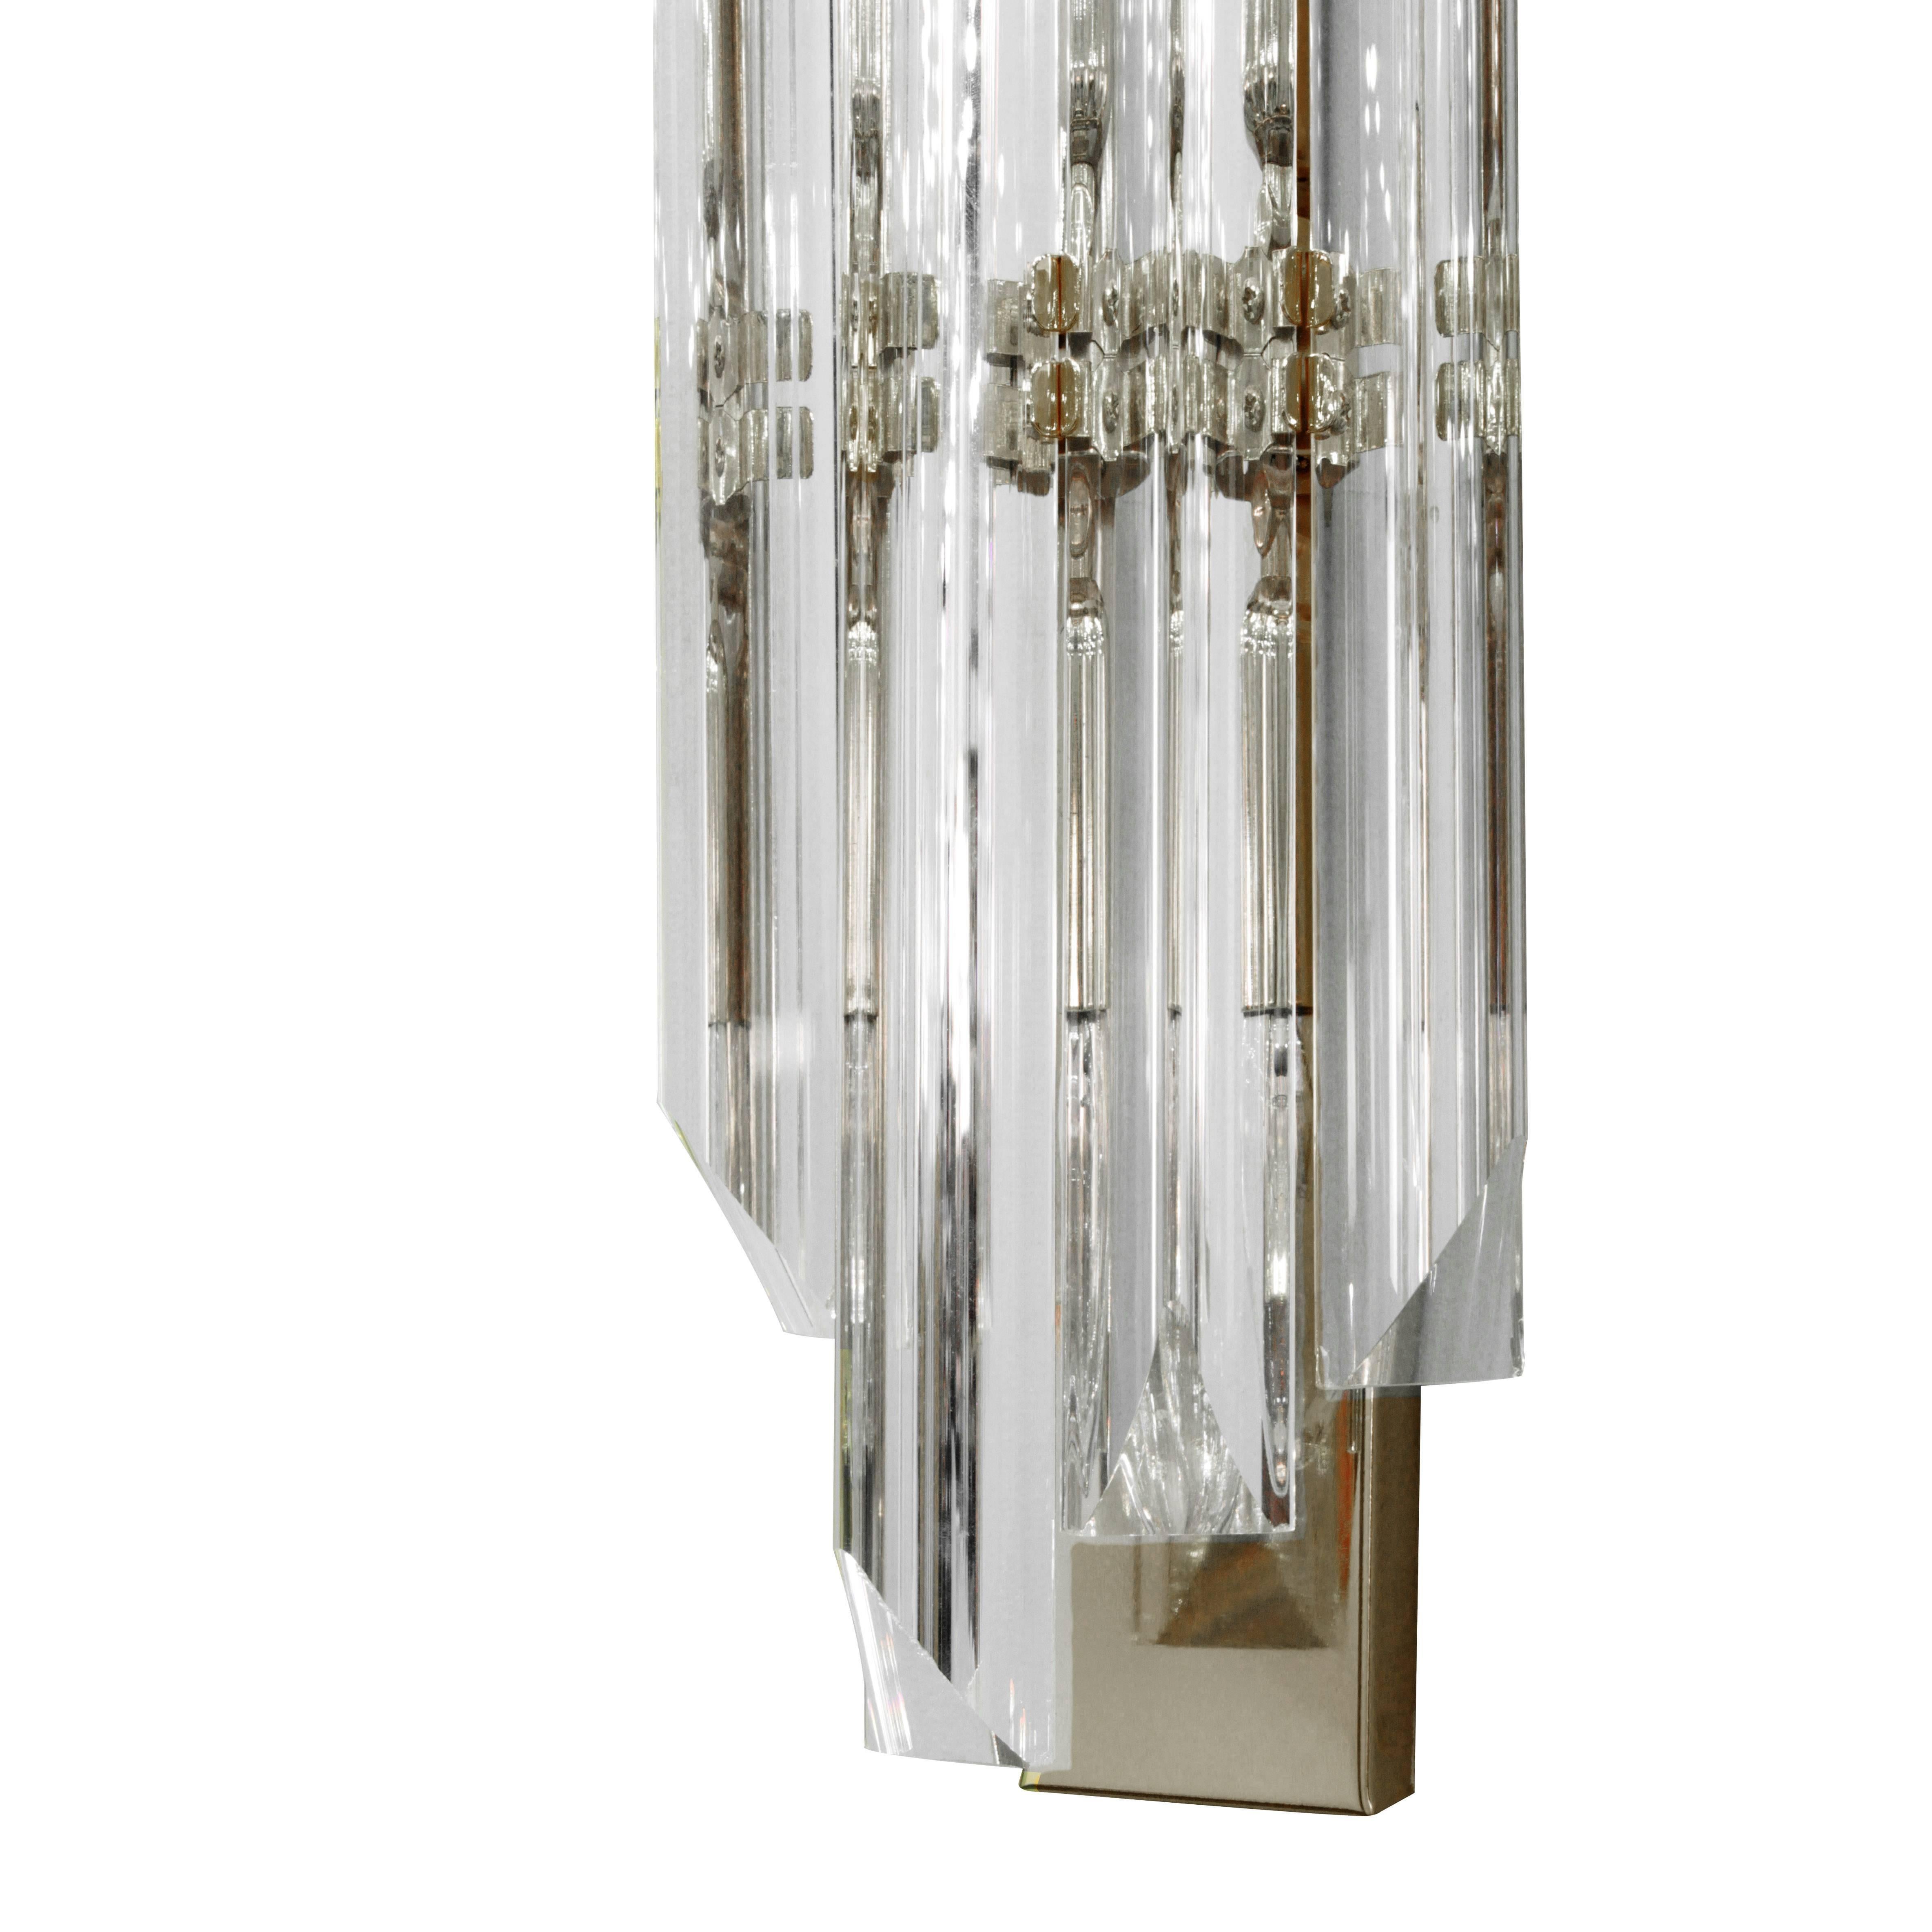 Elegant pair of sconces, chrome with molded glass rods, by Sciolari, Italy, 1960s. There are two pairs available.
      